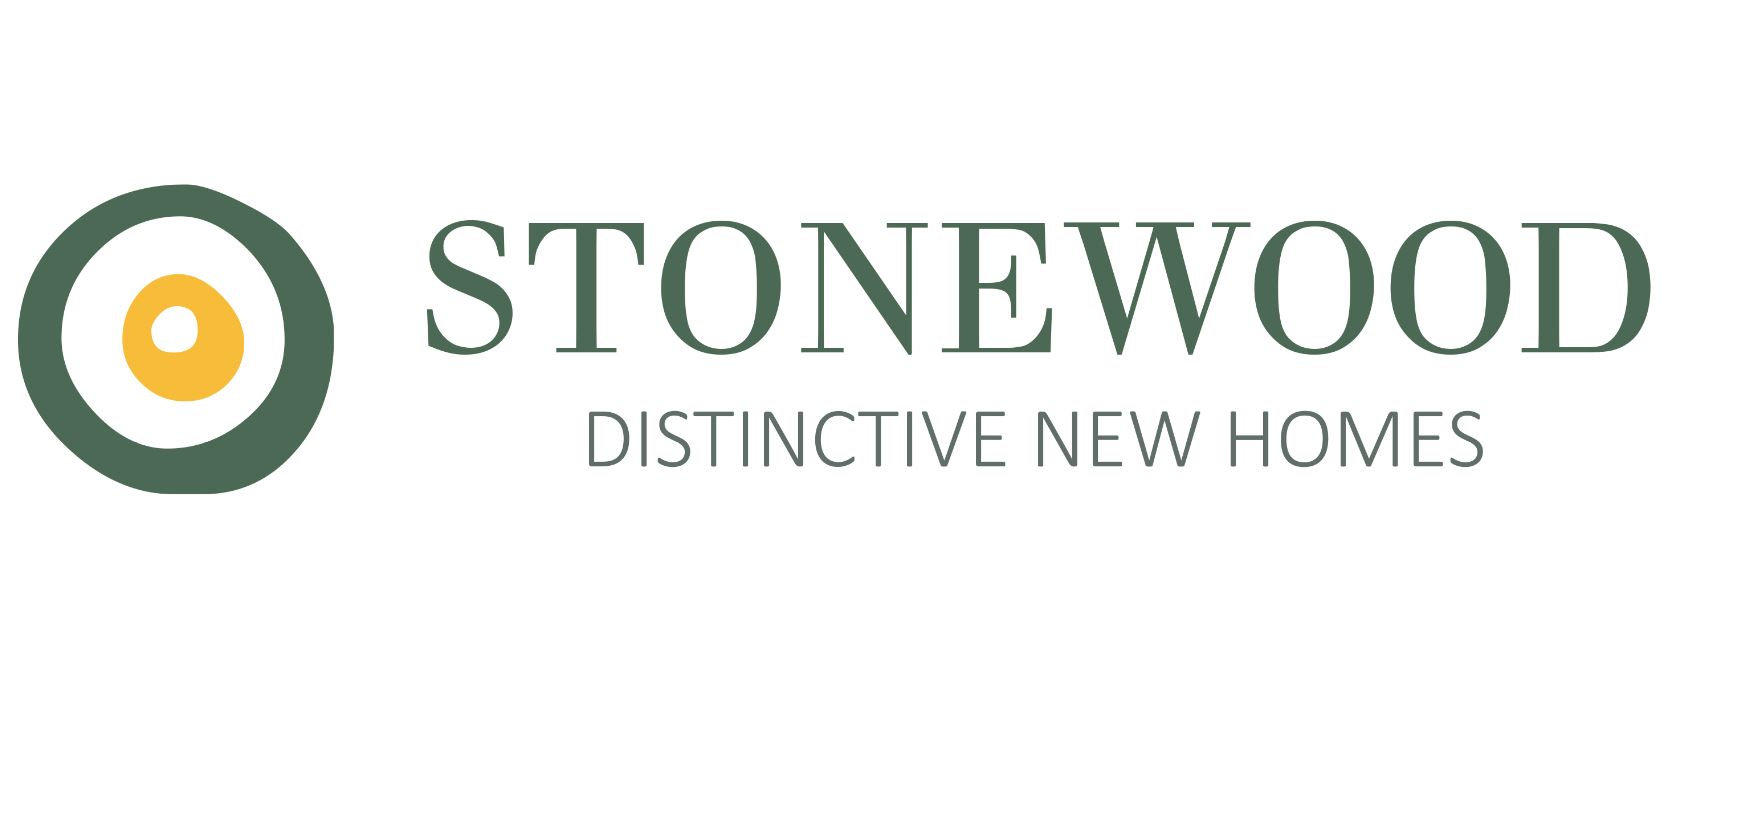 We would like to welcome Stonewood Homes to ContactBuilder.